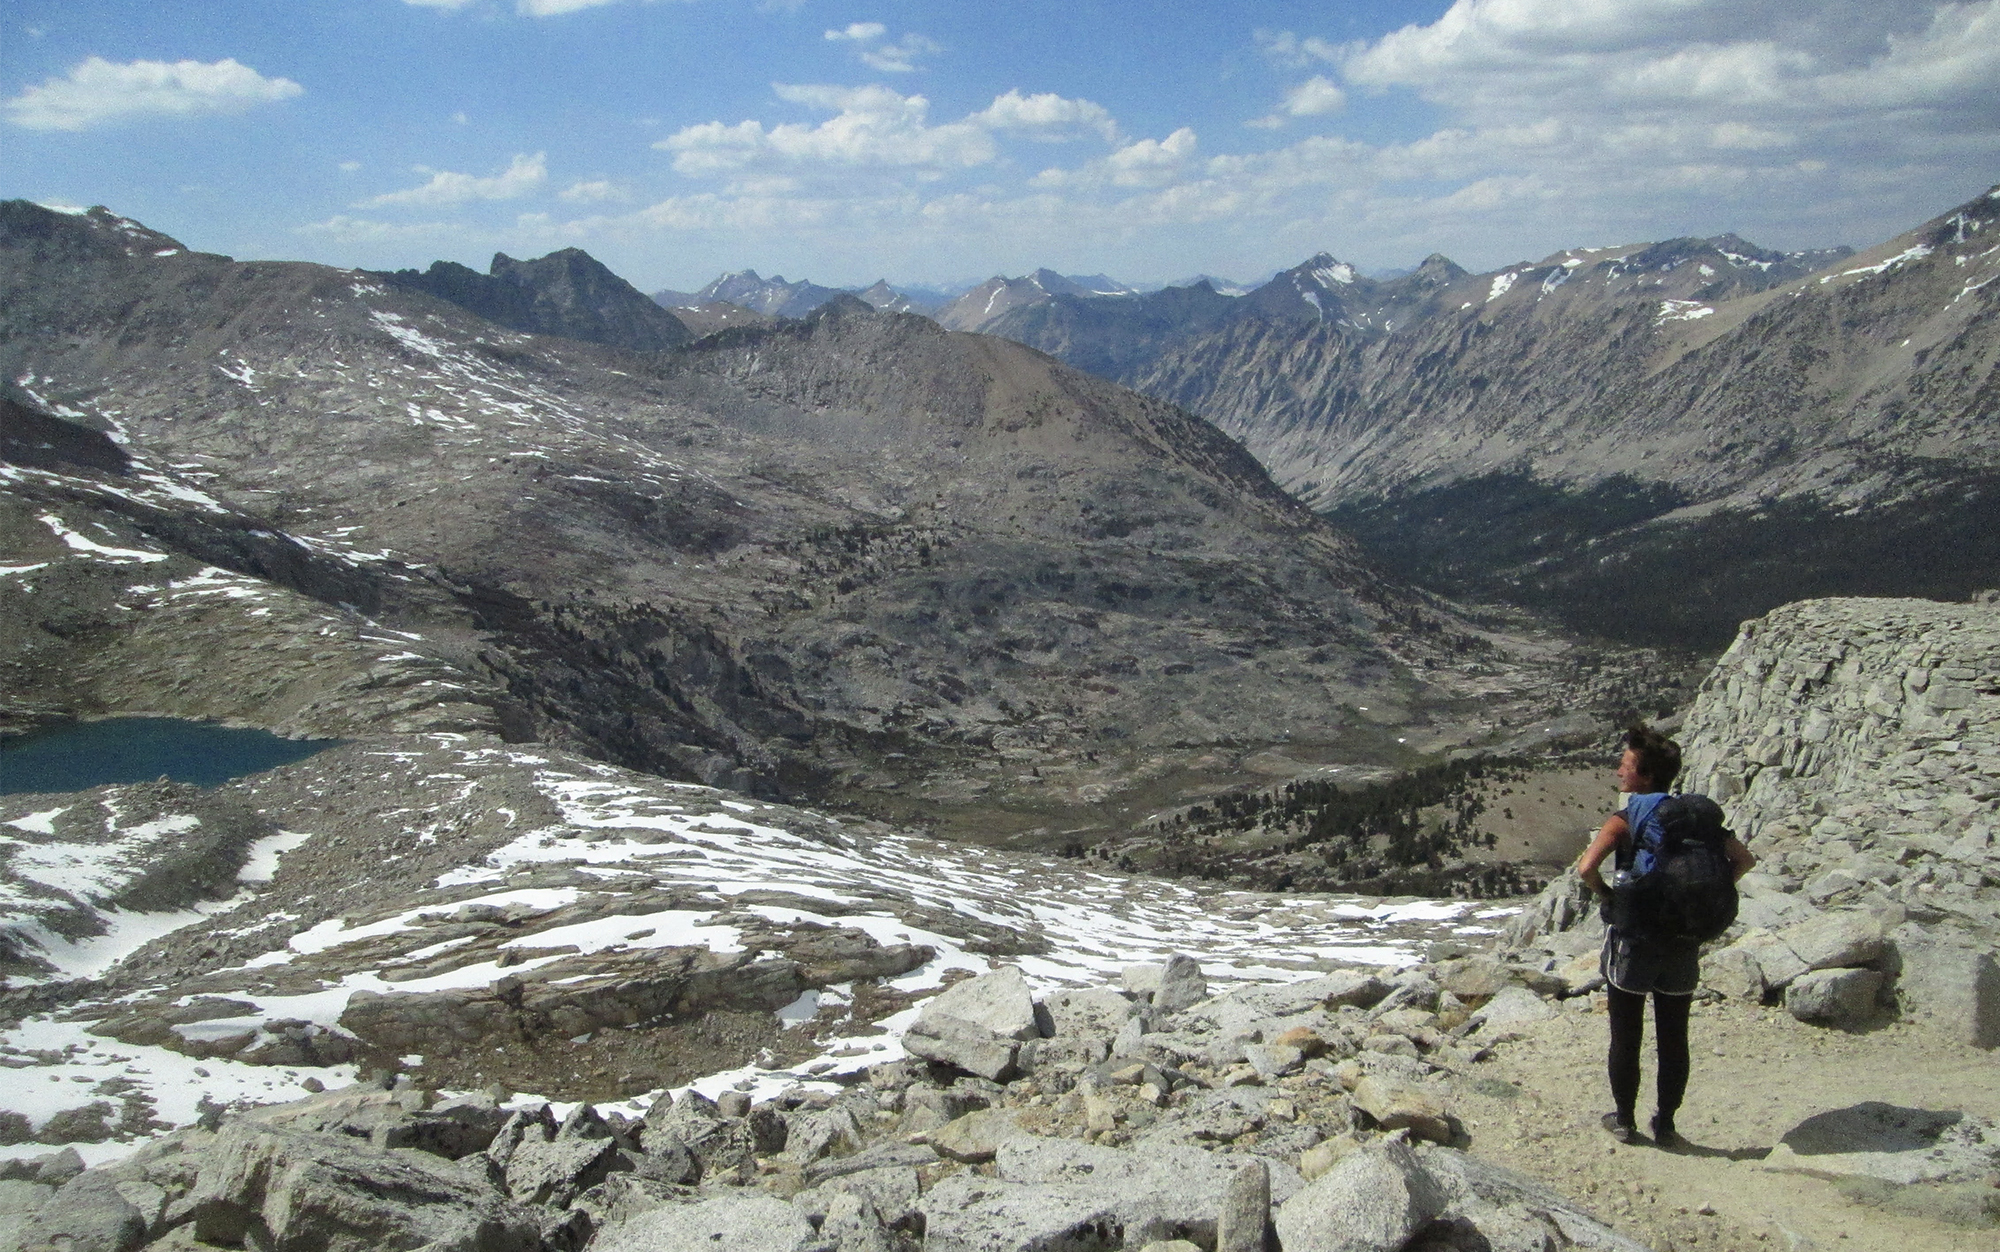 Woman looks at view at the top of a JMT trail pass